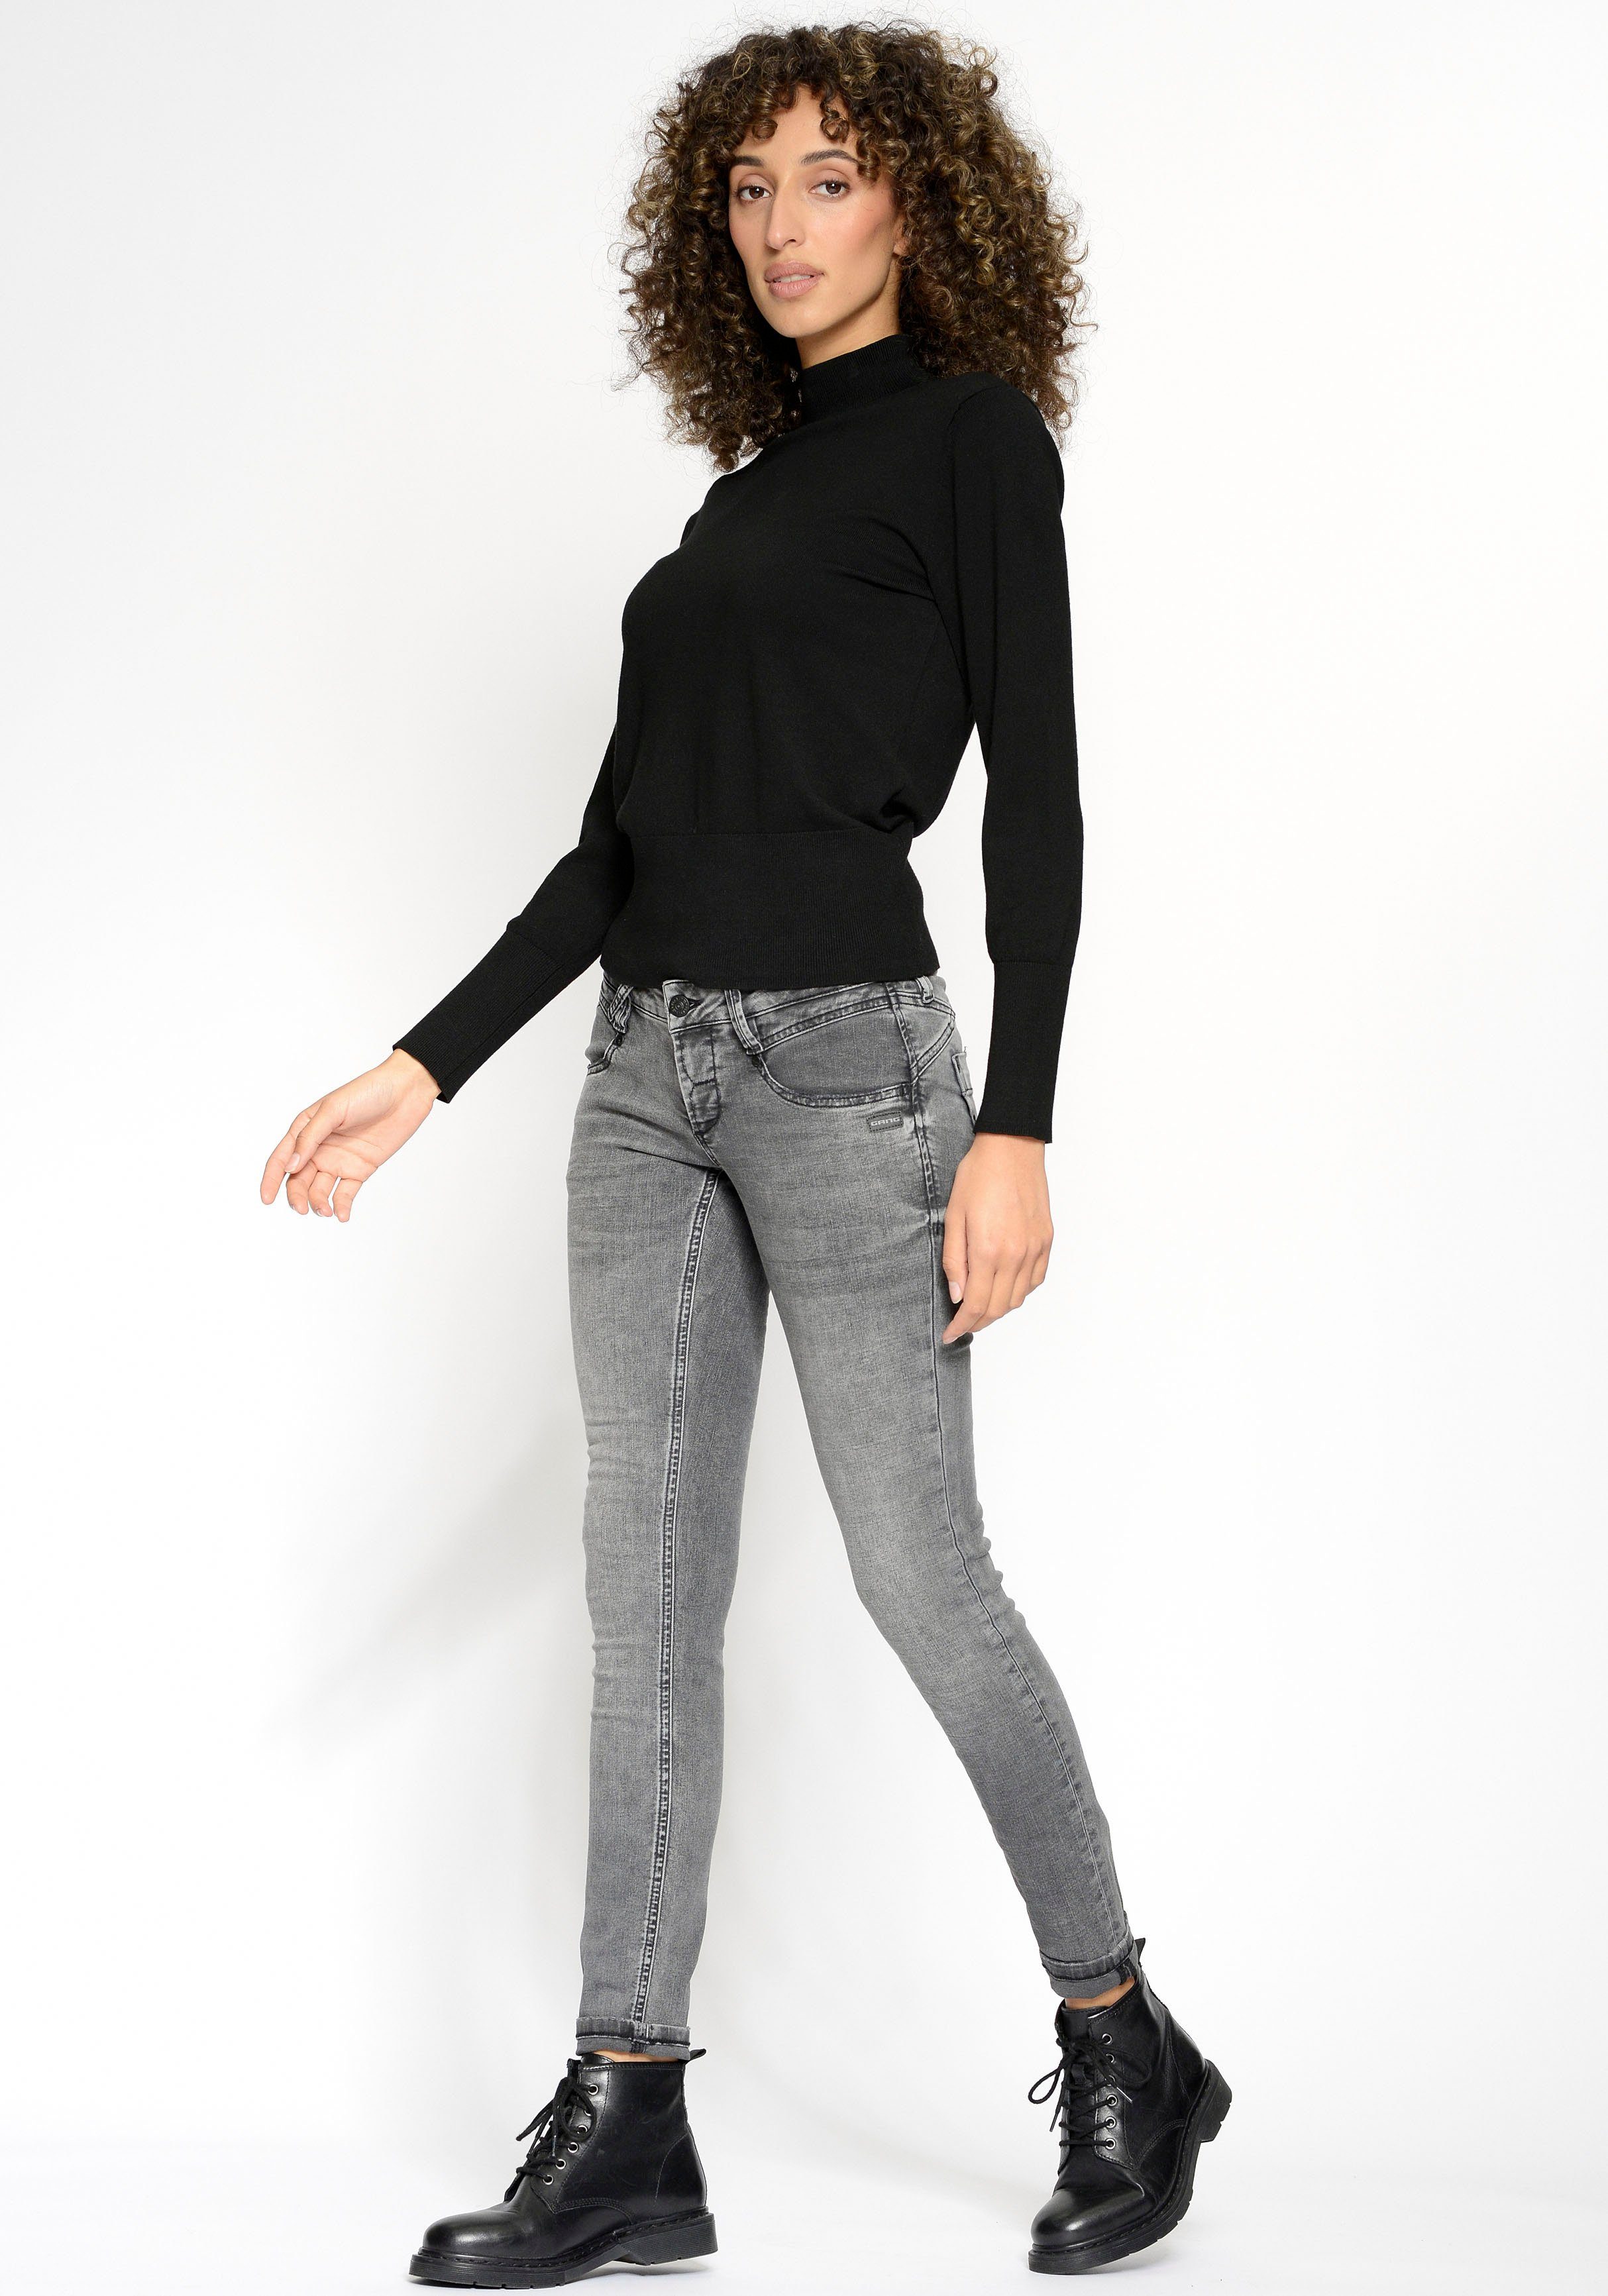 94Nena authenischer Used-Waschung GANG in Skinny-fit-Jeans abrasion black